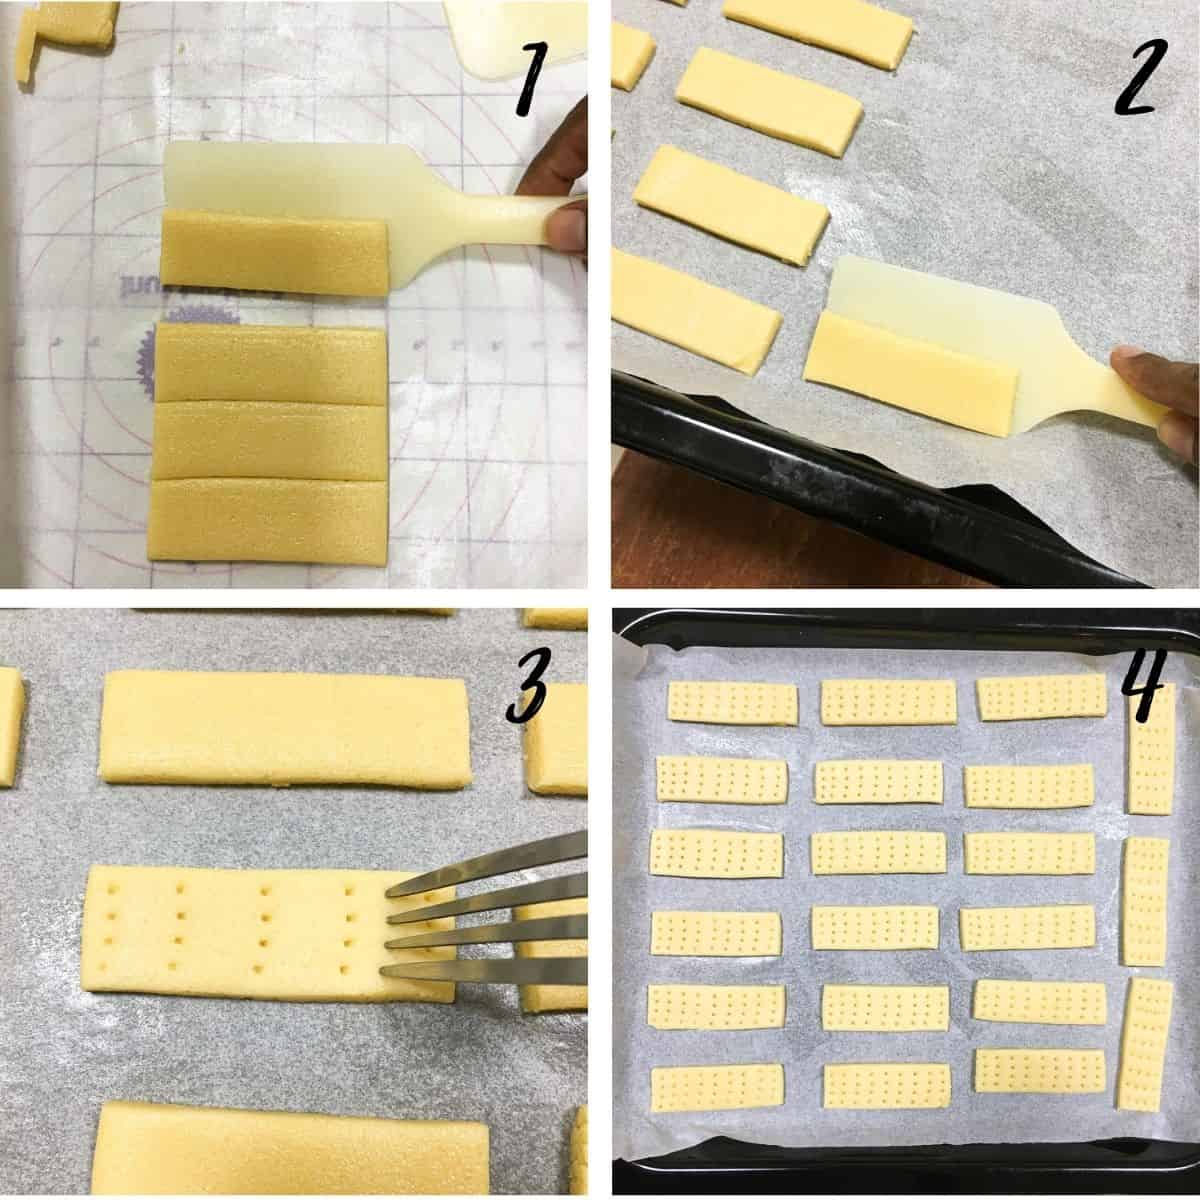 A poster of 4 images showing how to lift cut cookie dough with a spatula into a lined baking tray, how to make simple hole pattern on the cookies and a tray of fully arranged cookies on a tray.